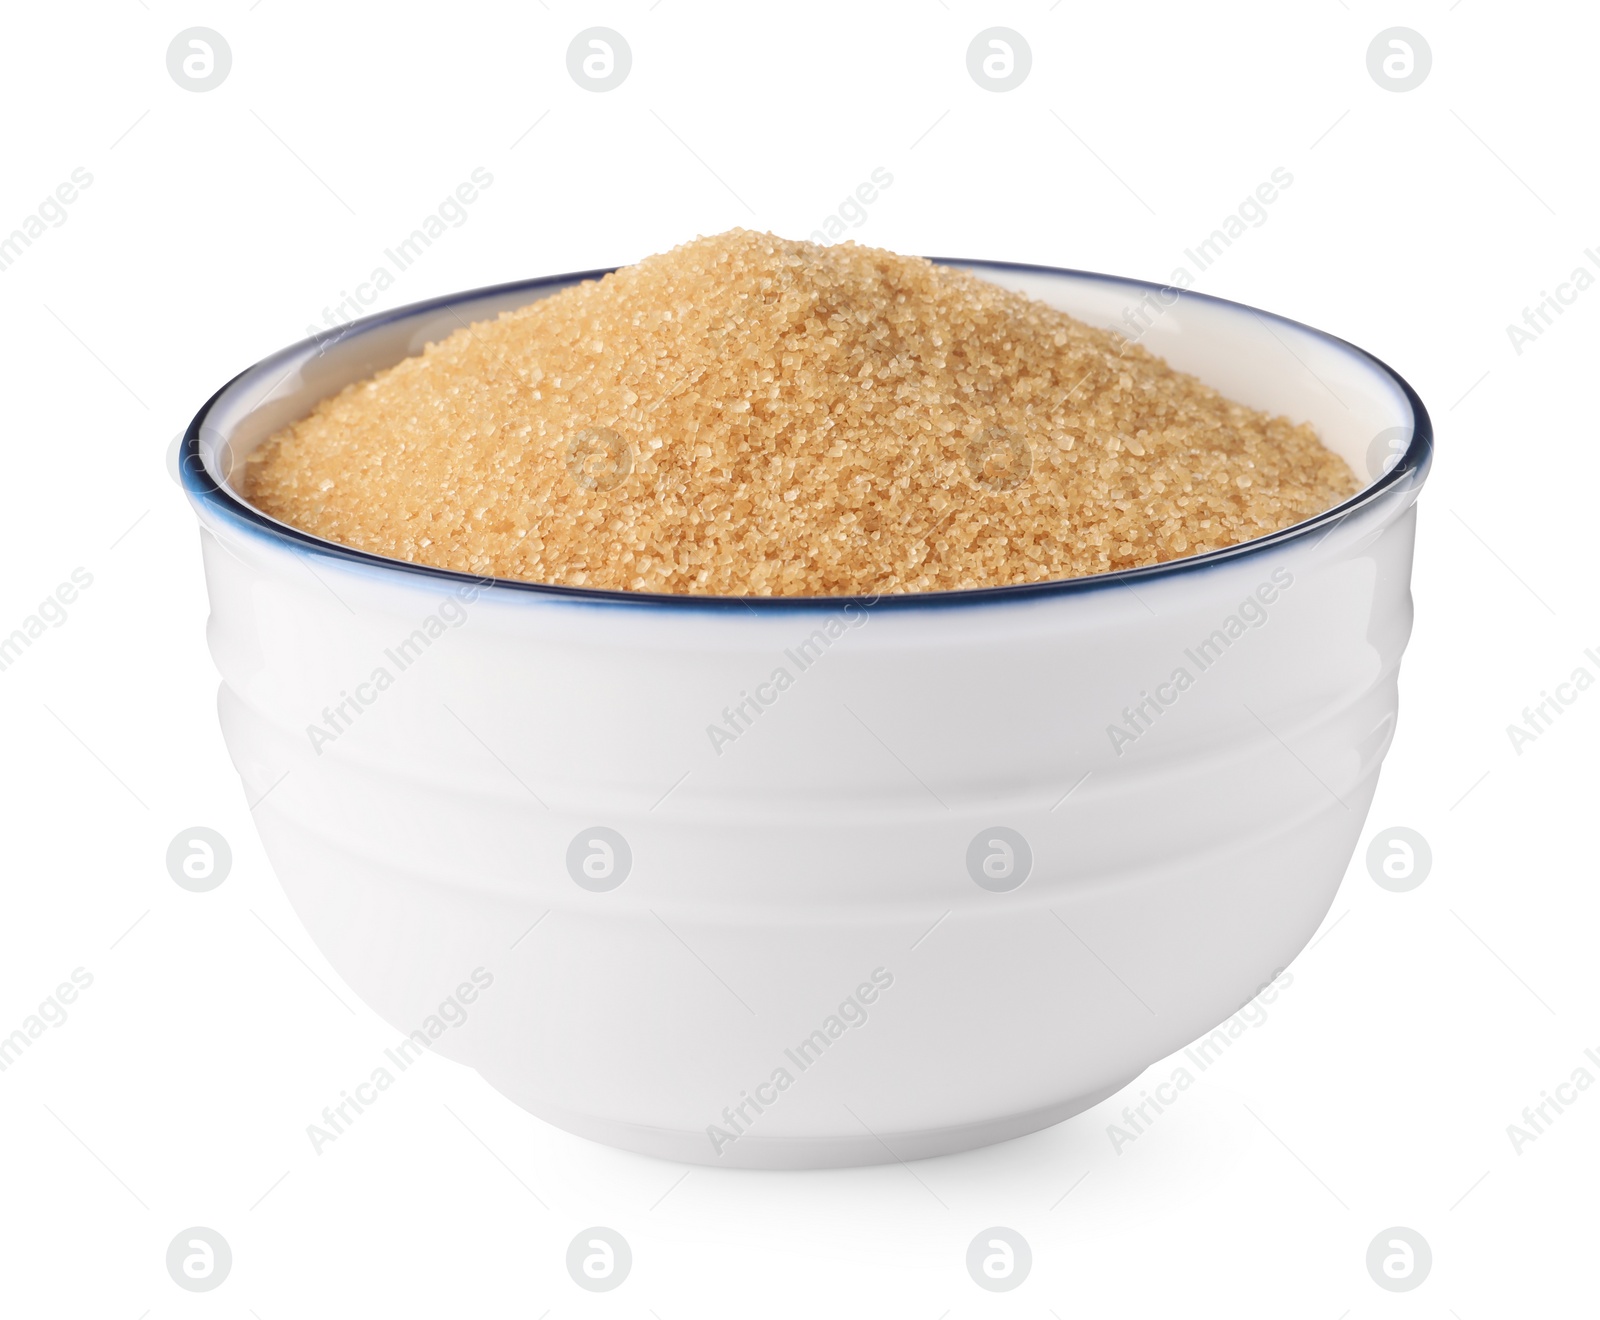 Photo of Bowl of granulated brown sugar isolated on white